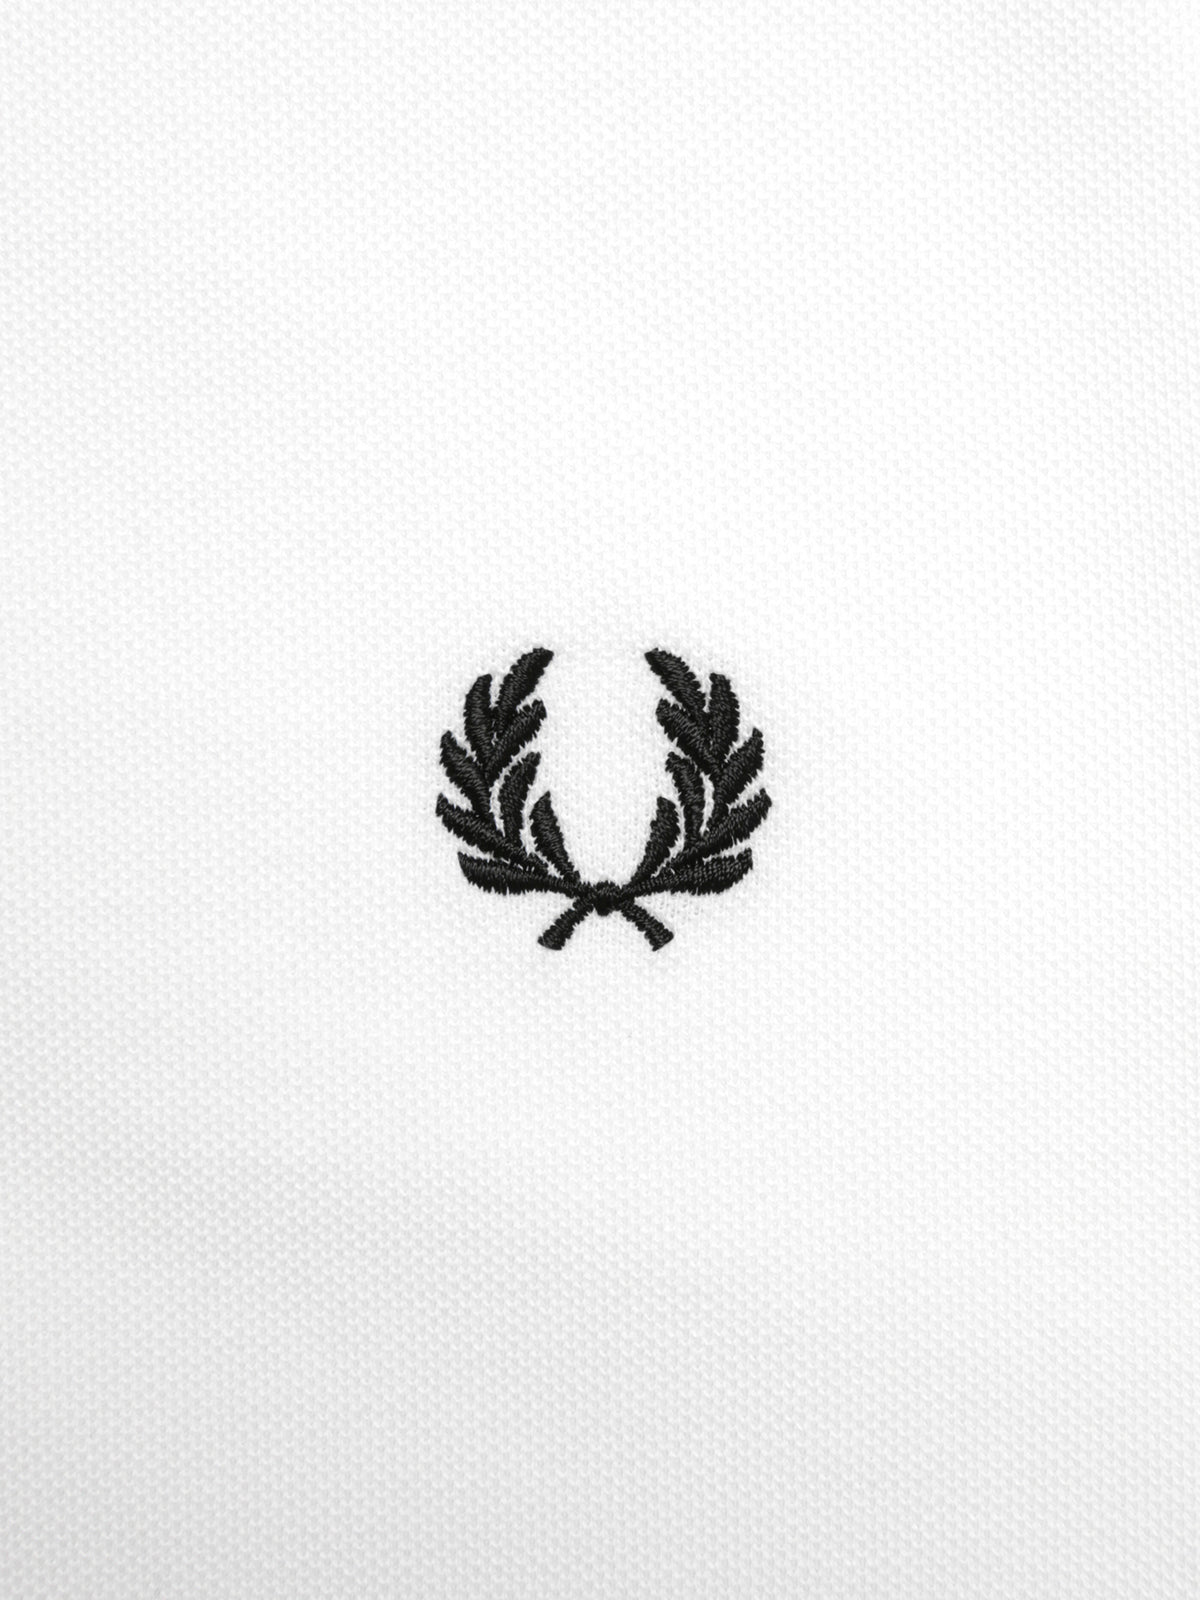 Twin Tipped Fred Perry Shirt in Snow White